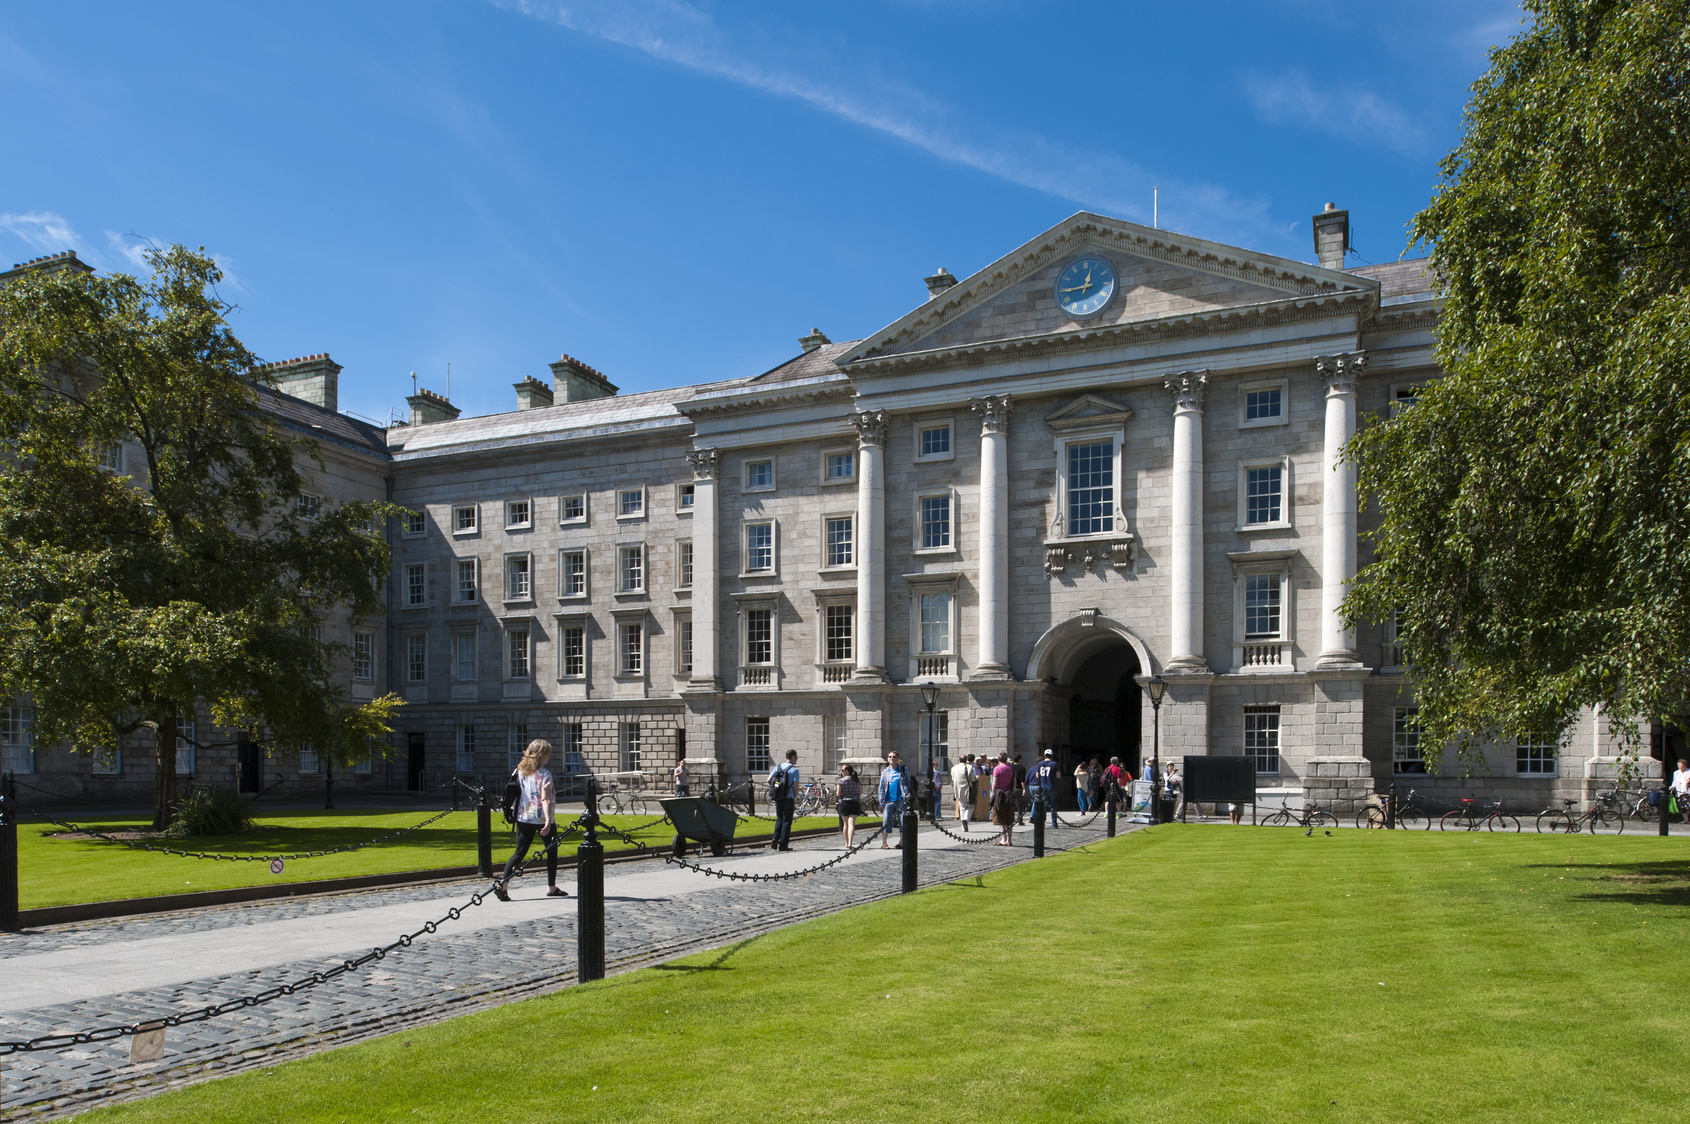 People walking through the grounds of Trinity College, Dublin, Ireland which was founded by Elizabeth 1 in 1592